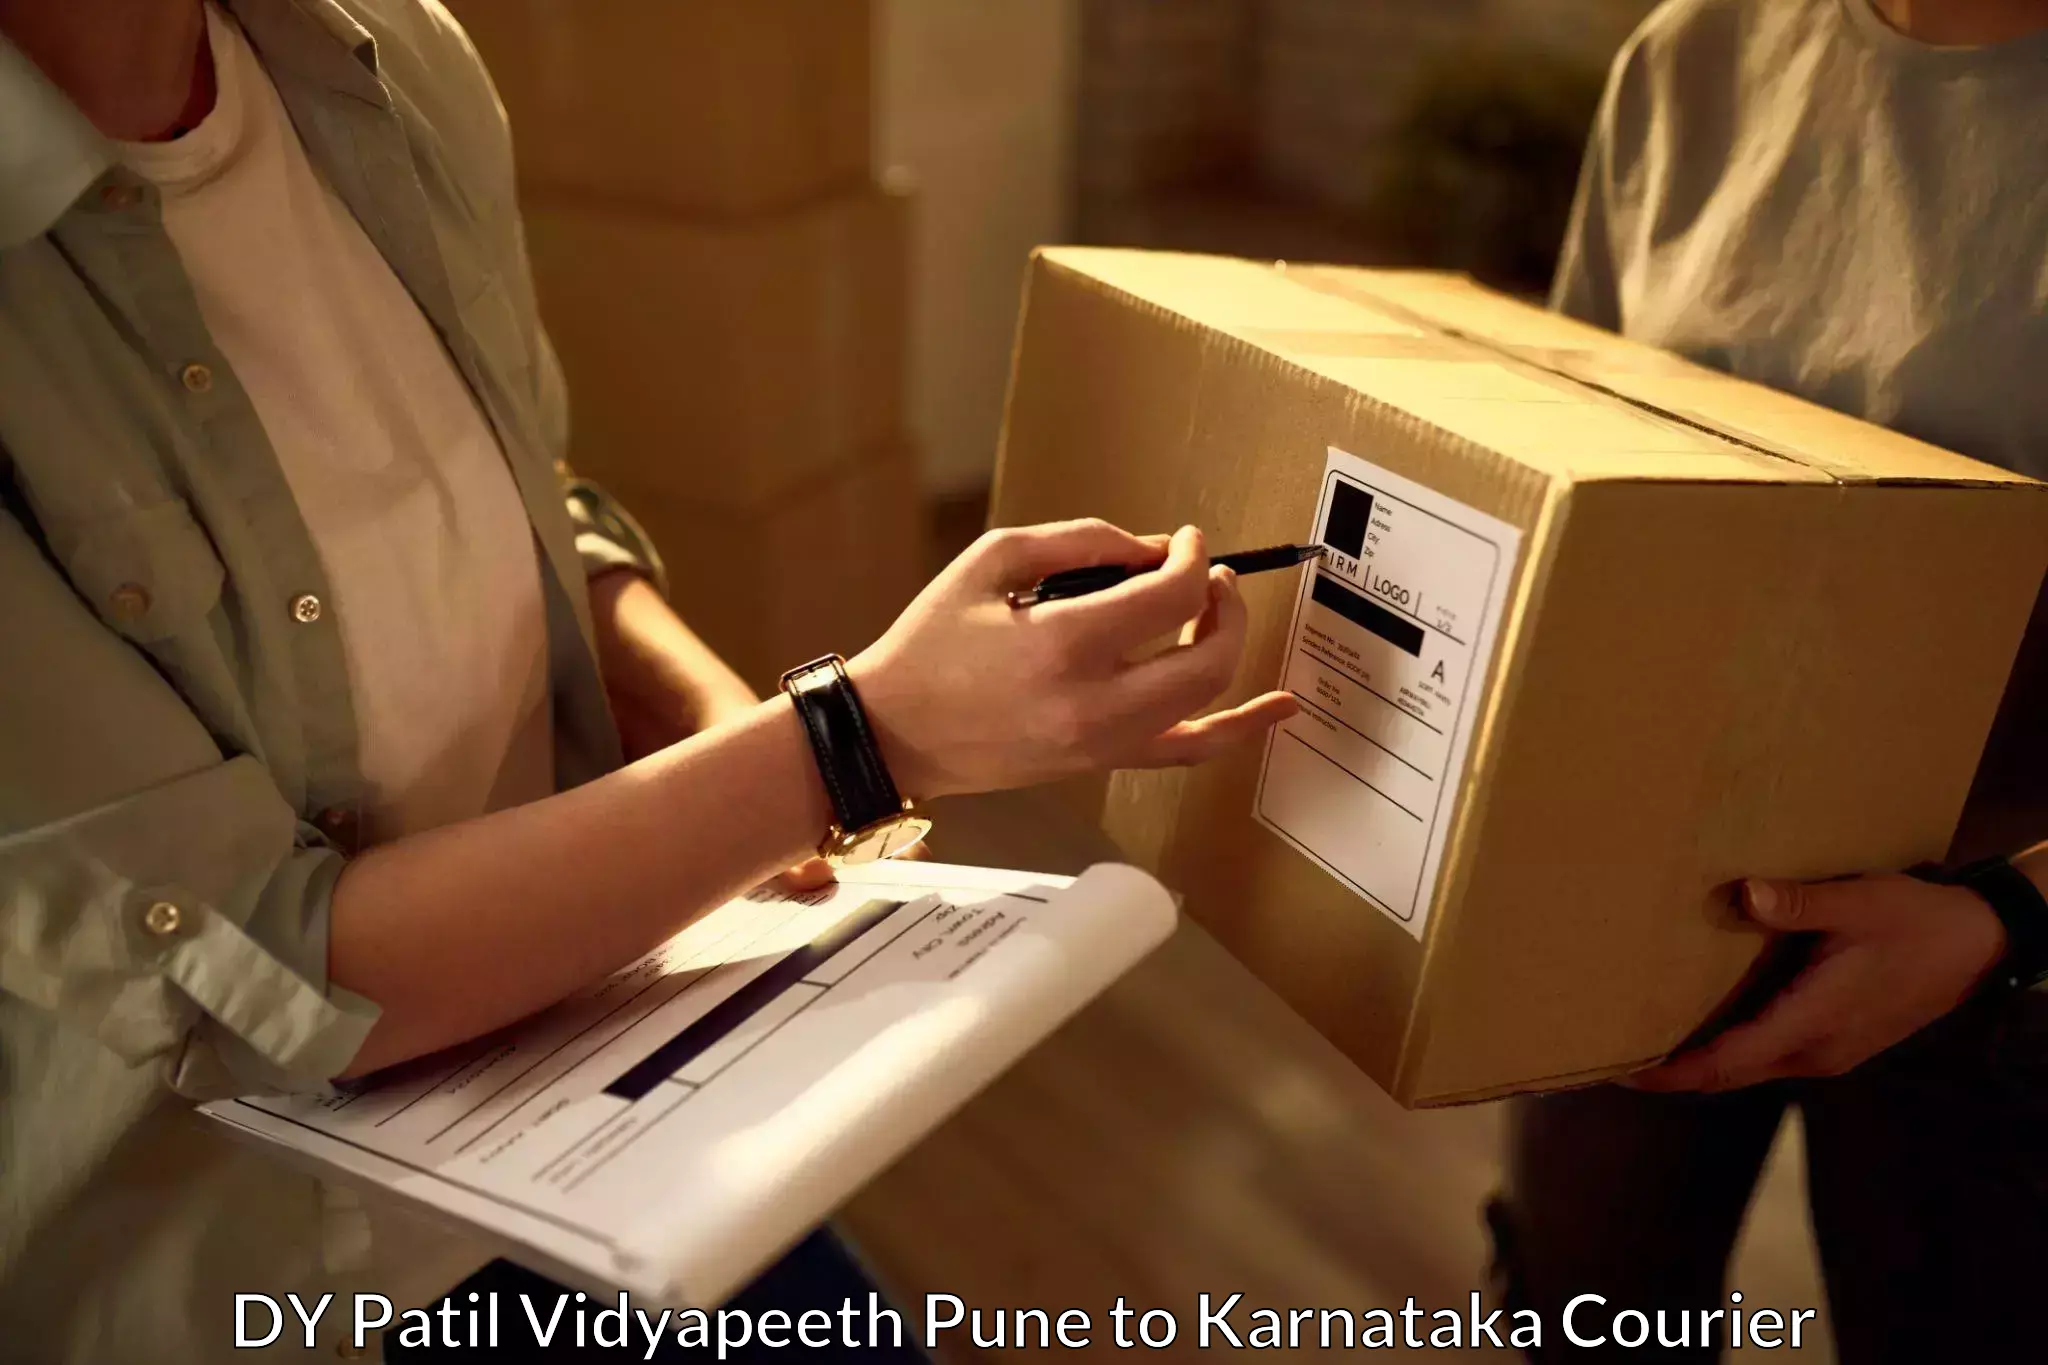 Professional courier services DY Patil Vidyapeeth Pune to Aland Kalaburagi